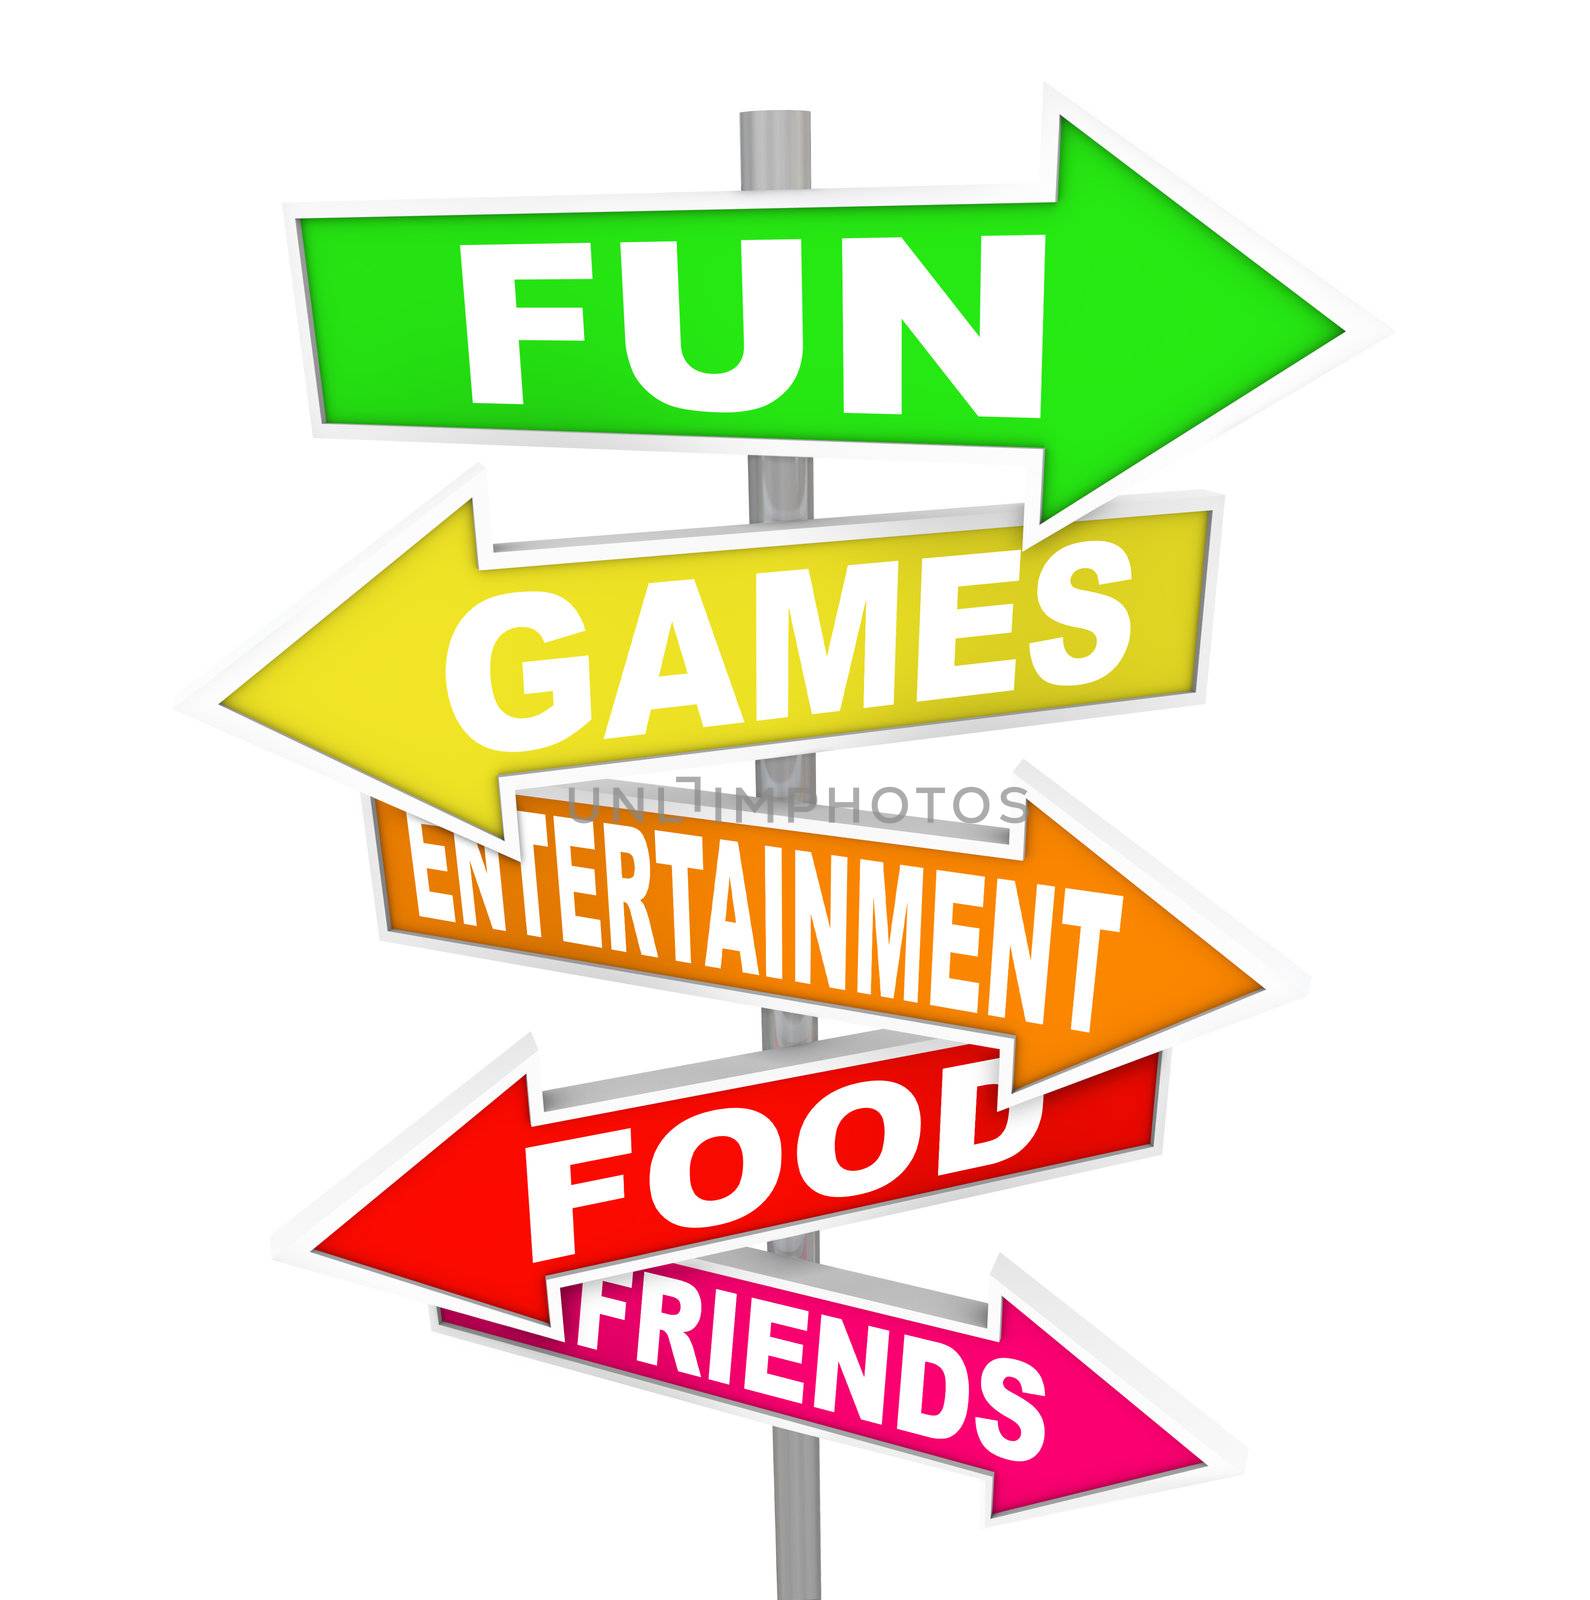 The words Fun, Games, Entertainment, Food and Friends on several colorful directional arrow signs pointing you to events and activities for having a good time with recreation and festivities